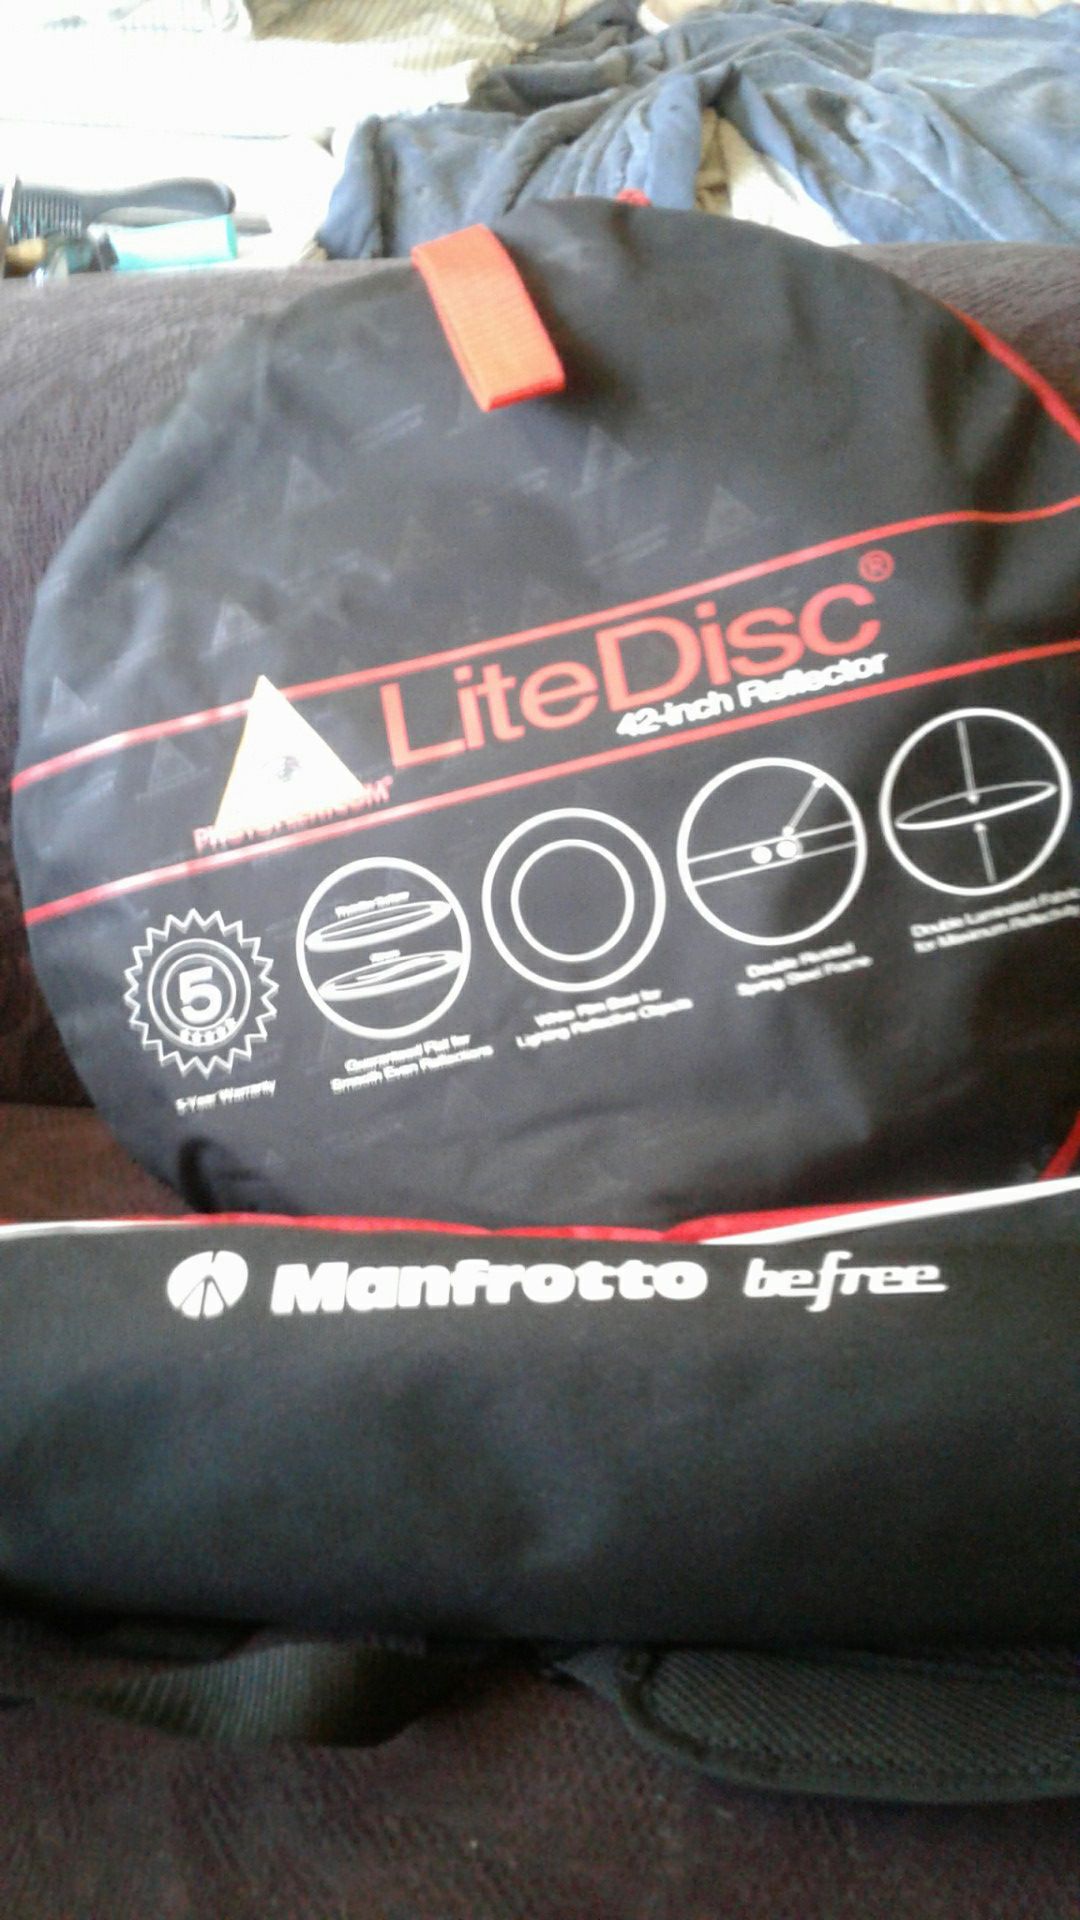 Photo flex light disc and manfrotto befree tripod